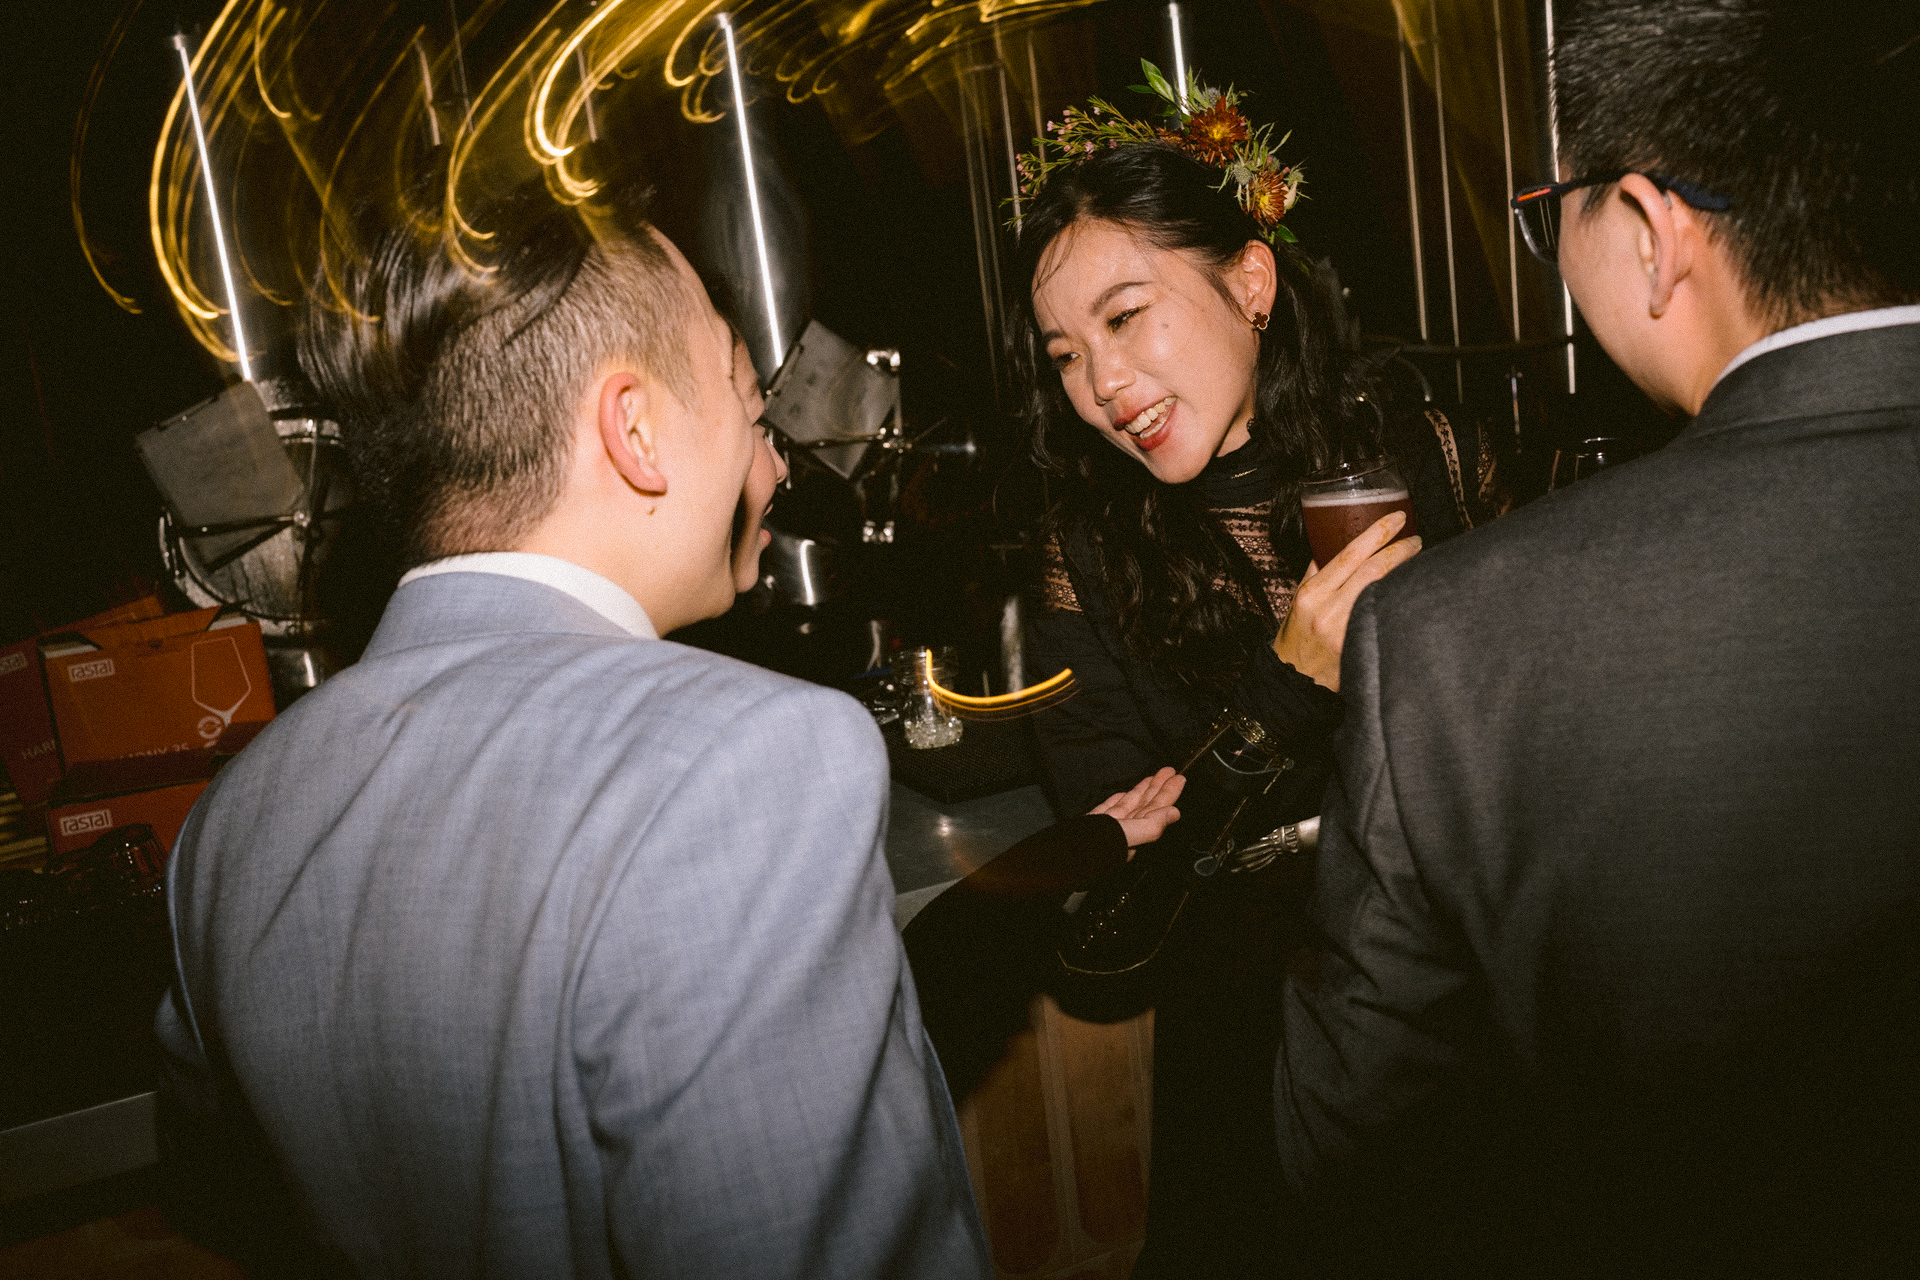 Bride laughing during a conversation with two men at an evening event.